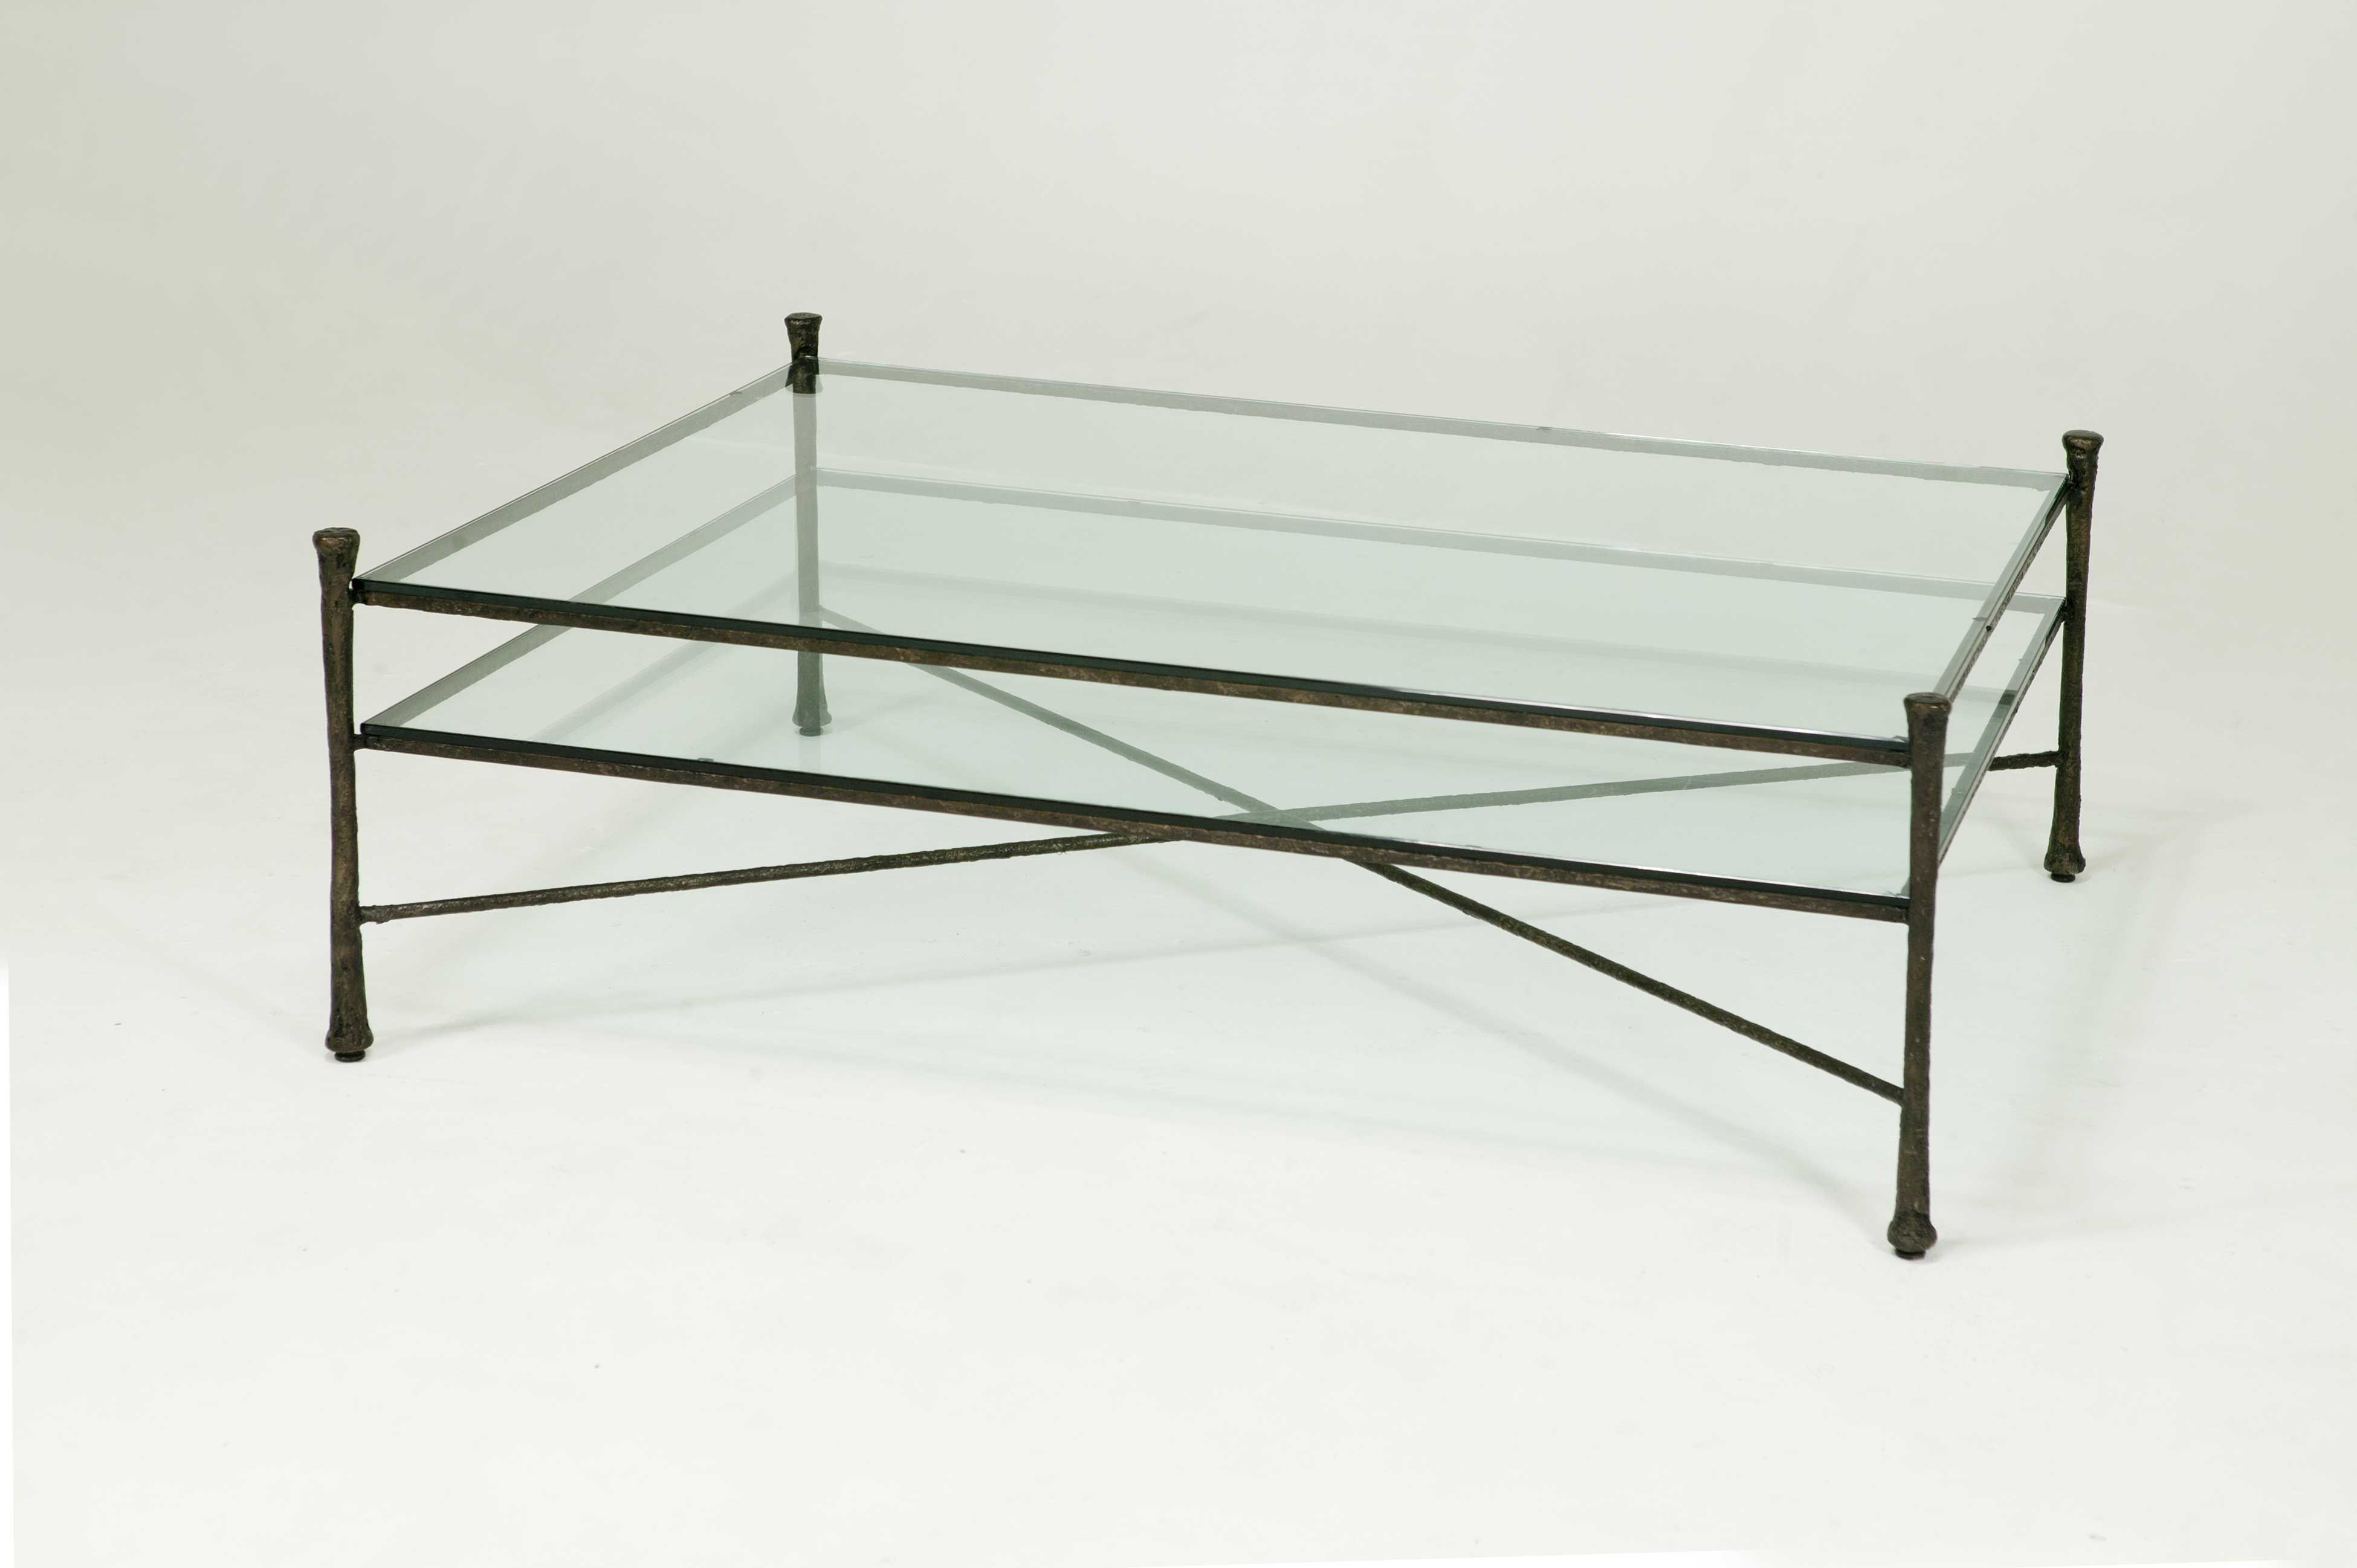 Iron Glass Coffee Table Beautiful Interior Furniture Design But Also Suspends A Woven Cat Hammock Below So You (View 1 of 10)